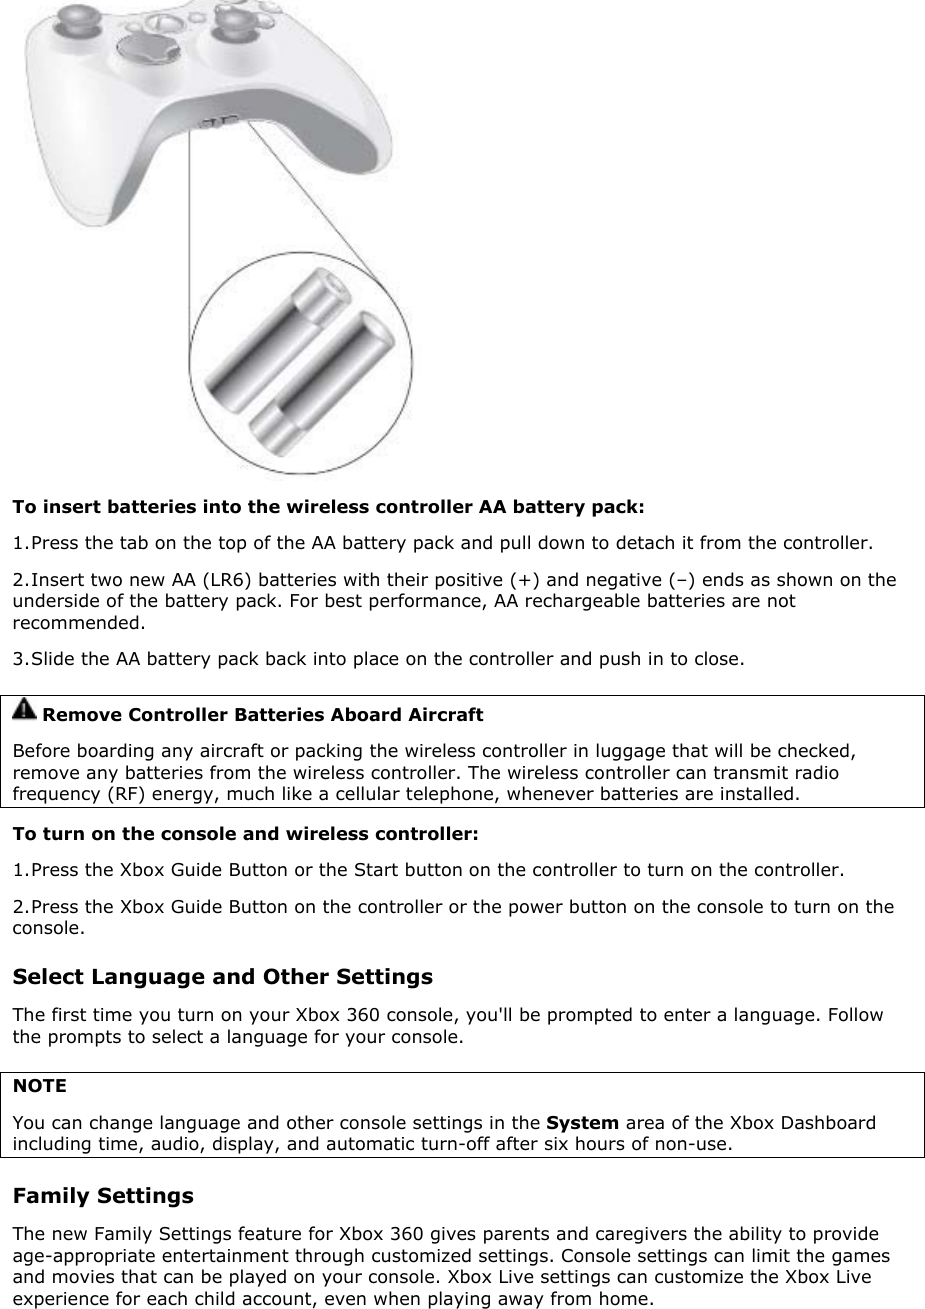  To insert batteries into the wireless controller AA battery pack: 1. Press the tab on the top of the AA battery pack and pull down to detach it from the controller.  2. Insert two new AA (LR6) batteries with their positive (+) and negative (–) ends as shown on the underside of the battery pack. For best performance, AA rechargeable batteries are not recommended.  3. Slide the AA battery pack back into place on the controller and push in to close.  Remove Controller Batteries Aboard Aircraft Before boarding any aircraft or packing the wireless controller in luggage that will be checked, remove any batteries from the wireless controller. The wireless controller can transmit radio frequency (RF) energy, much like a cellular telephone, whenever batteries are installed.  To turn on the console and wireless controller:  1. Press the Xbox Guide Button or the Start button on the controller to turn on the controller. 2. Press the Xbox Guide Button on the controller or the power button on the console to turn on the console. Select Language and Other Settings The first time you turn on your Xbox 360 console, you&apos;ll be prompted to enter a language. Follow the prompts to select a language for your console. NOTE You can change language and other console settings in the System area of the Xbox Dashboard including time, audio, display, and automatic turn-off after six hours of non-use.  Family Settings The new Family Settings feature for Xbox 360 gives parents and caregivers the ability to provide age-appropriate entertainment through customized settings. Console settings can limit the games and movies that can be played on your console. Xbox Live settings can customize the Xbox Live experience for each child account, even when playing away from home.  